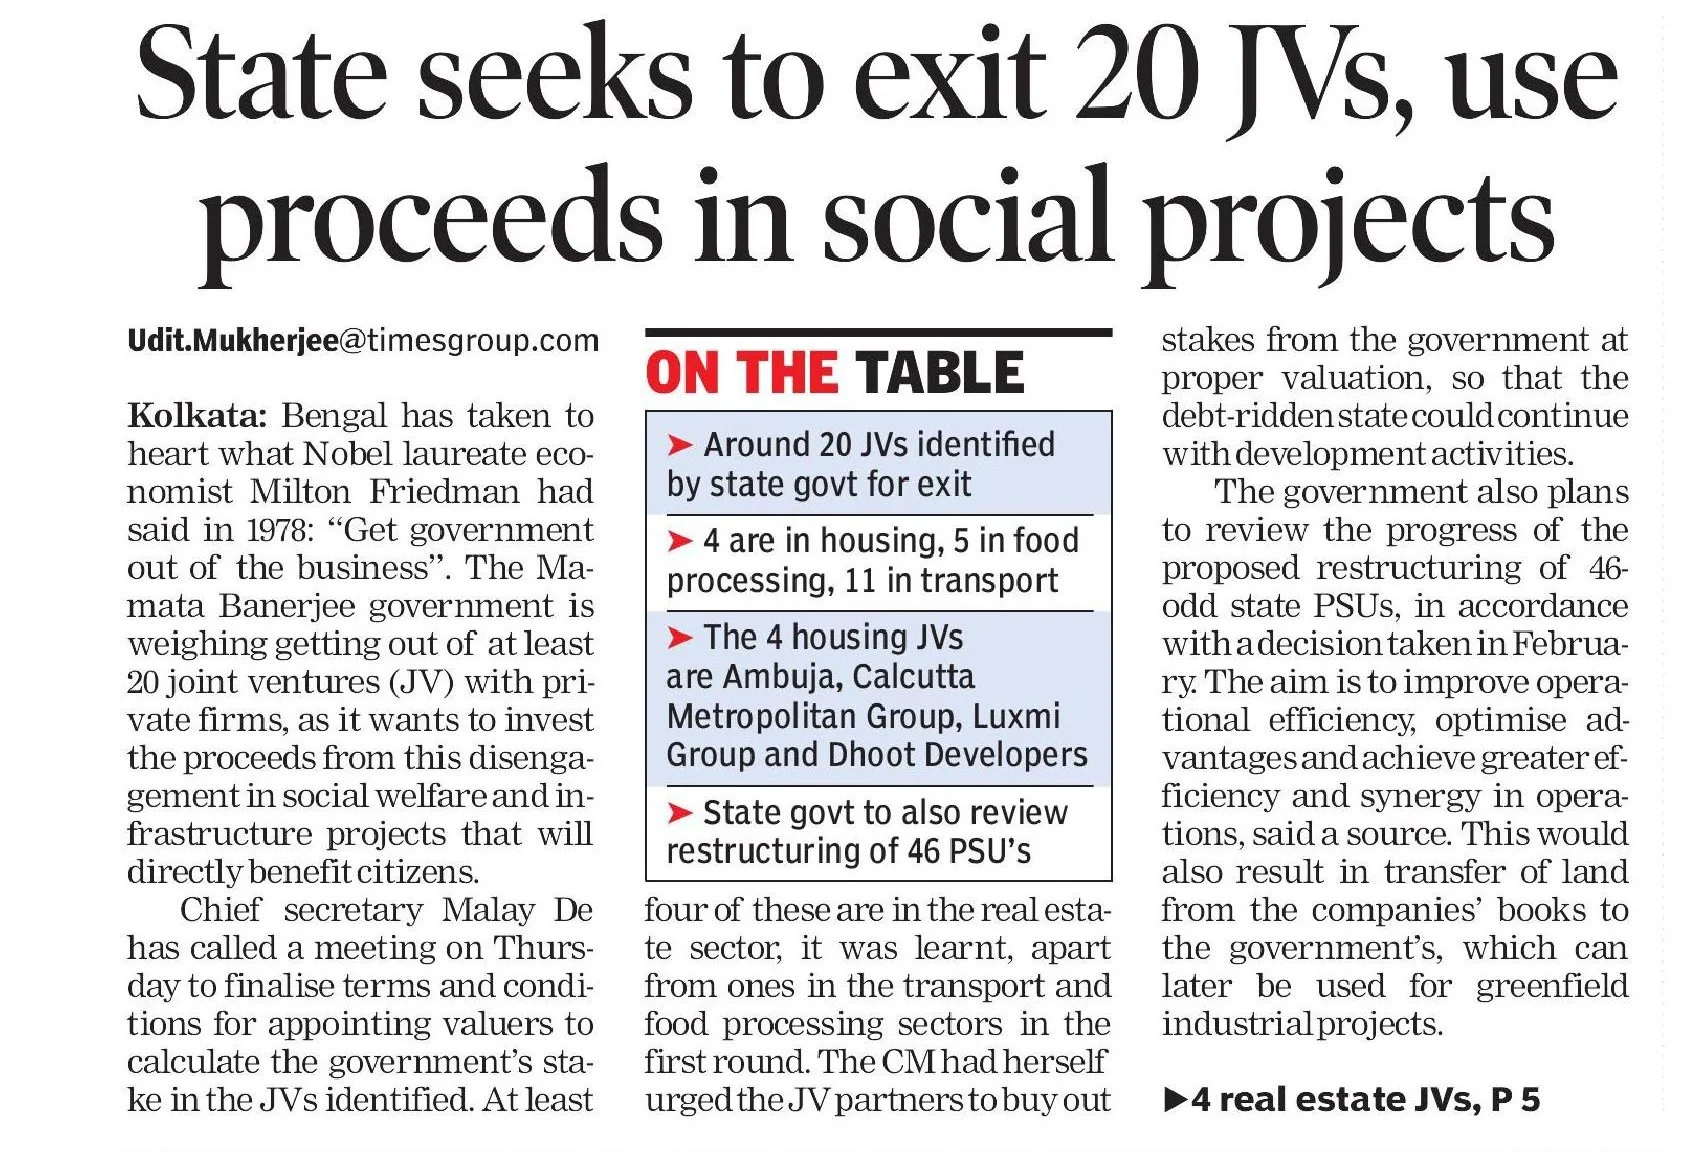 State seeks to exit 20 JVs, use proceeds in social projects